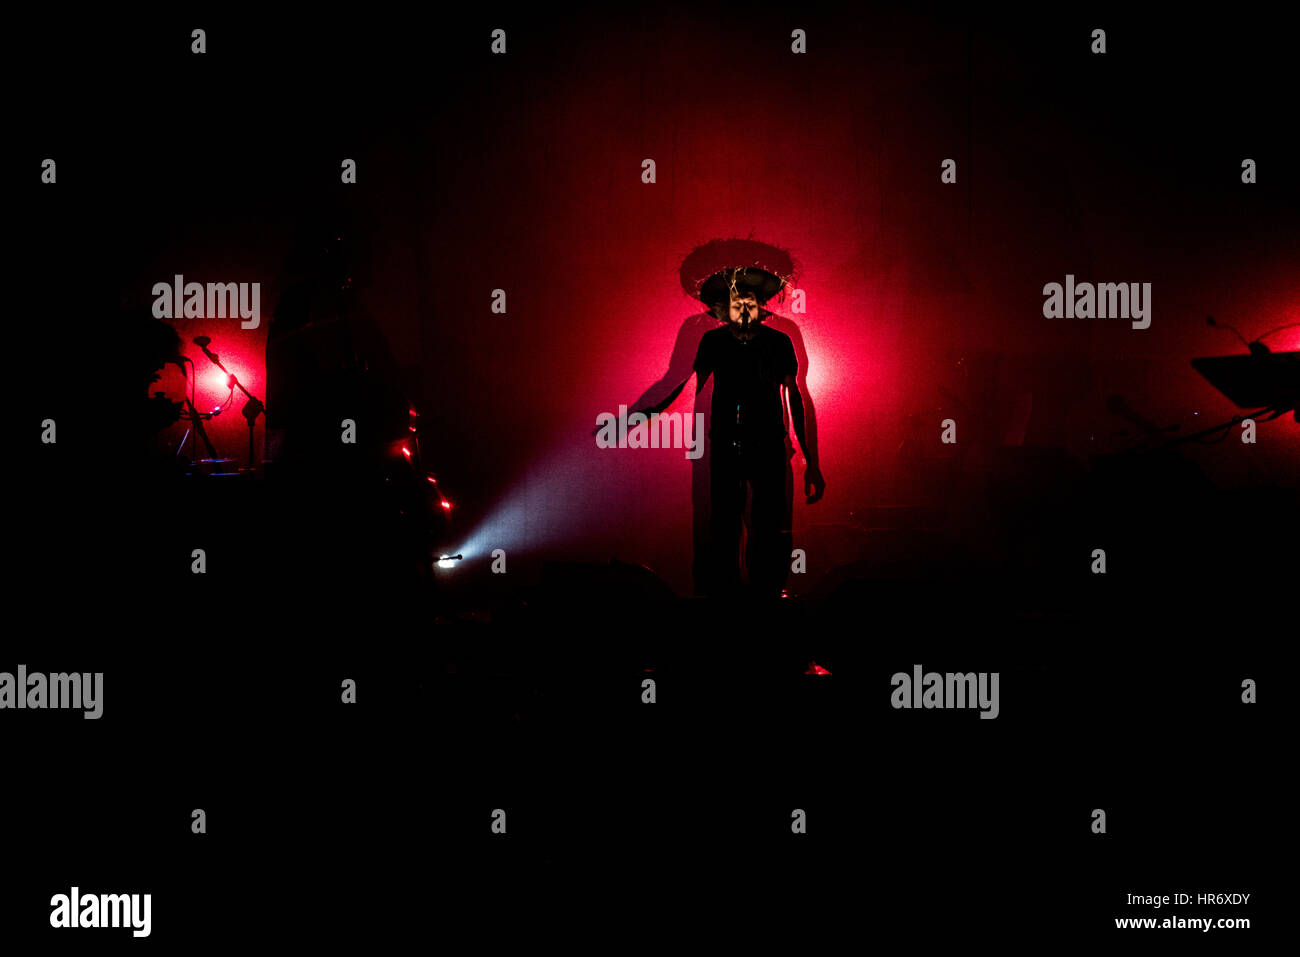 Turin, Italy. 27th February 2017. Italian singer Vinicio Capossela performing in Turin at Colosseo Theater during the 'Shadow tour' on 27th February 2017. 2017 foto by Credit: Alberto Gandolfo/Alamy Live News Stock Photo